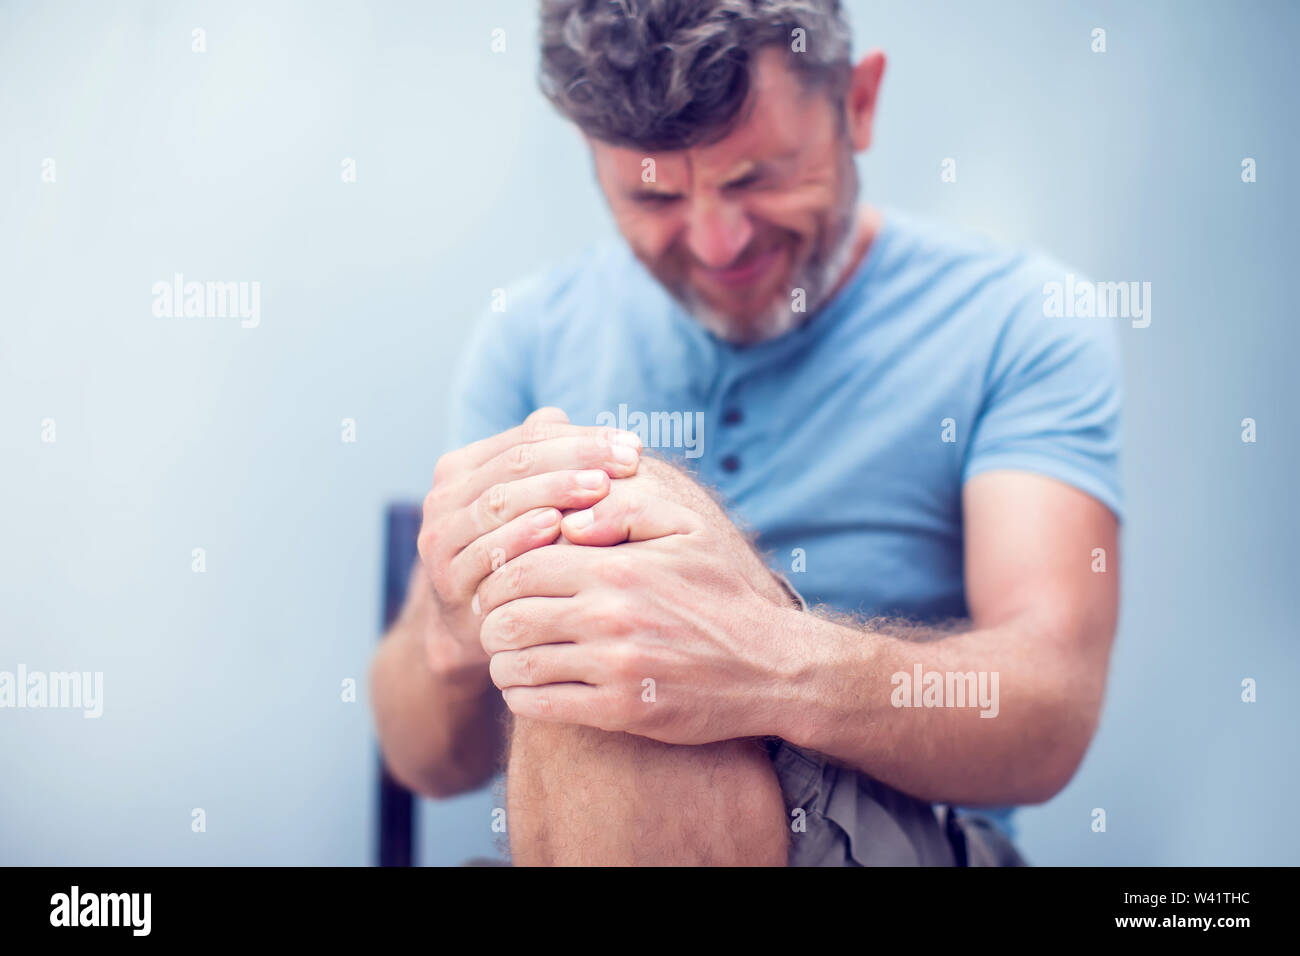 Man with knee pain close up. Pain relief concept Stock Photo